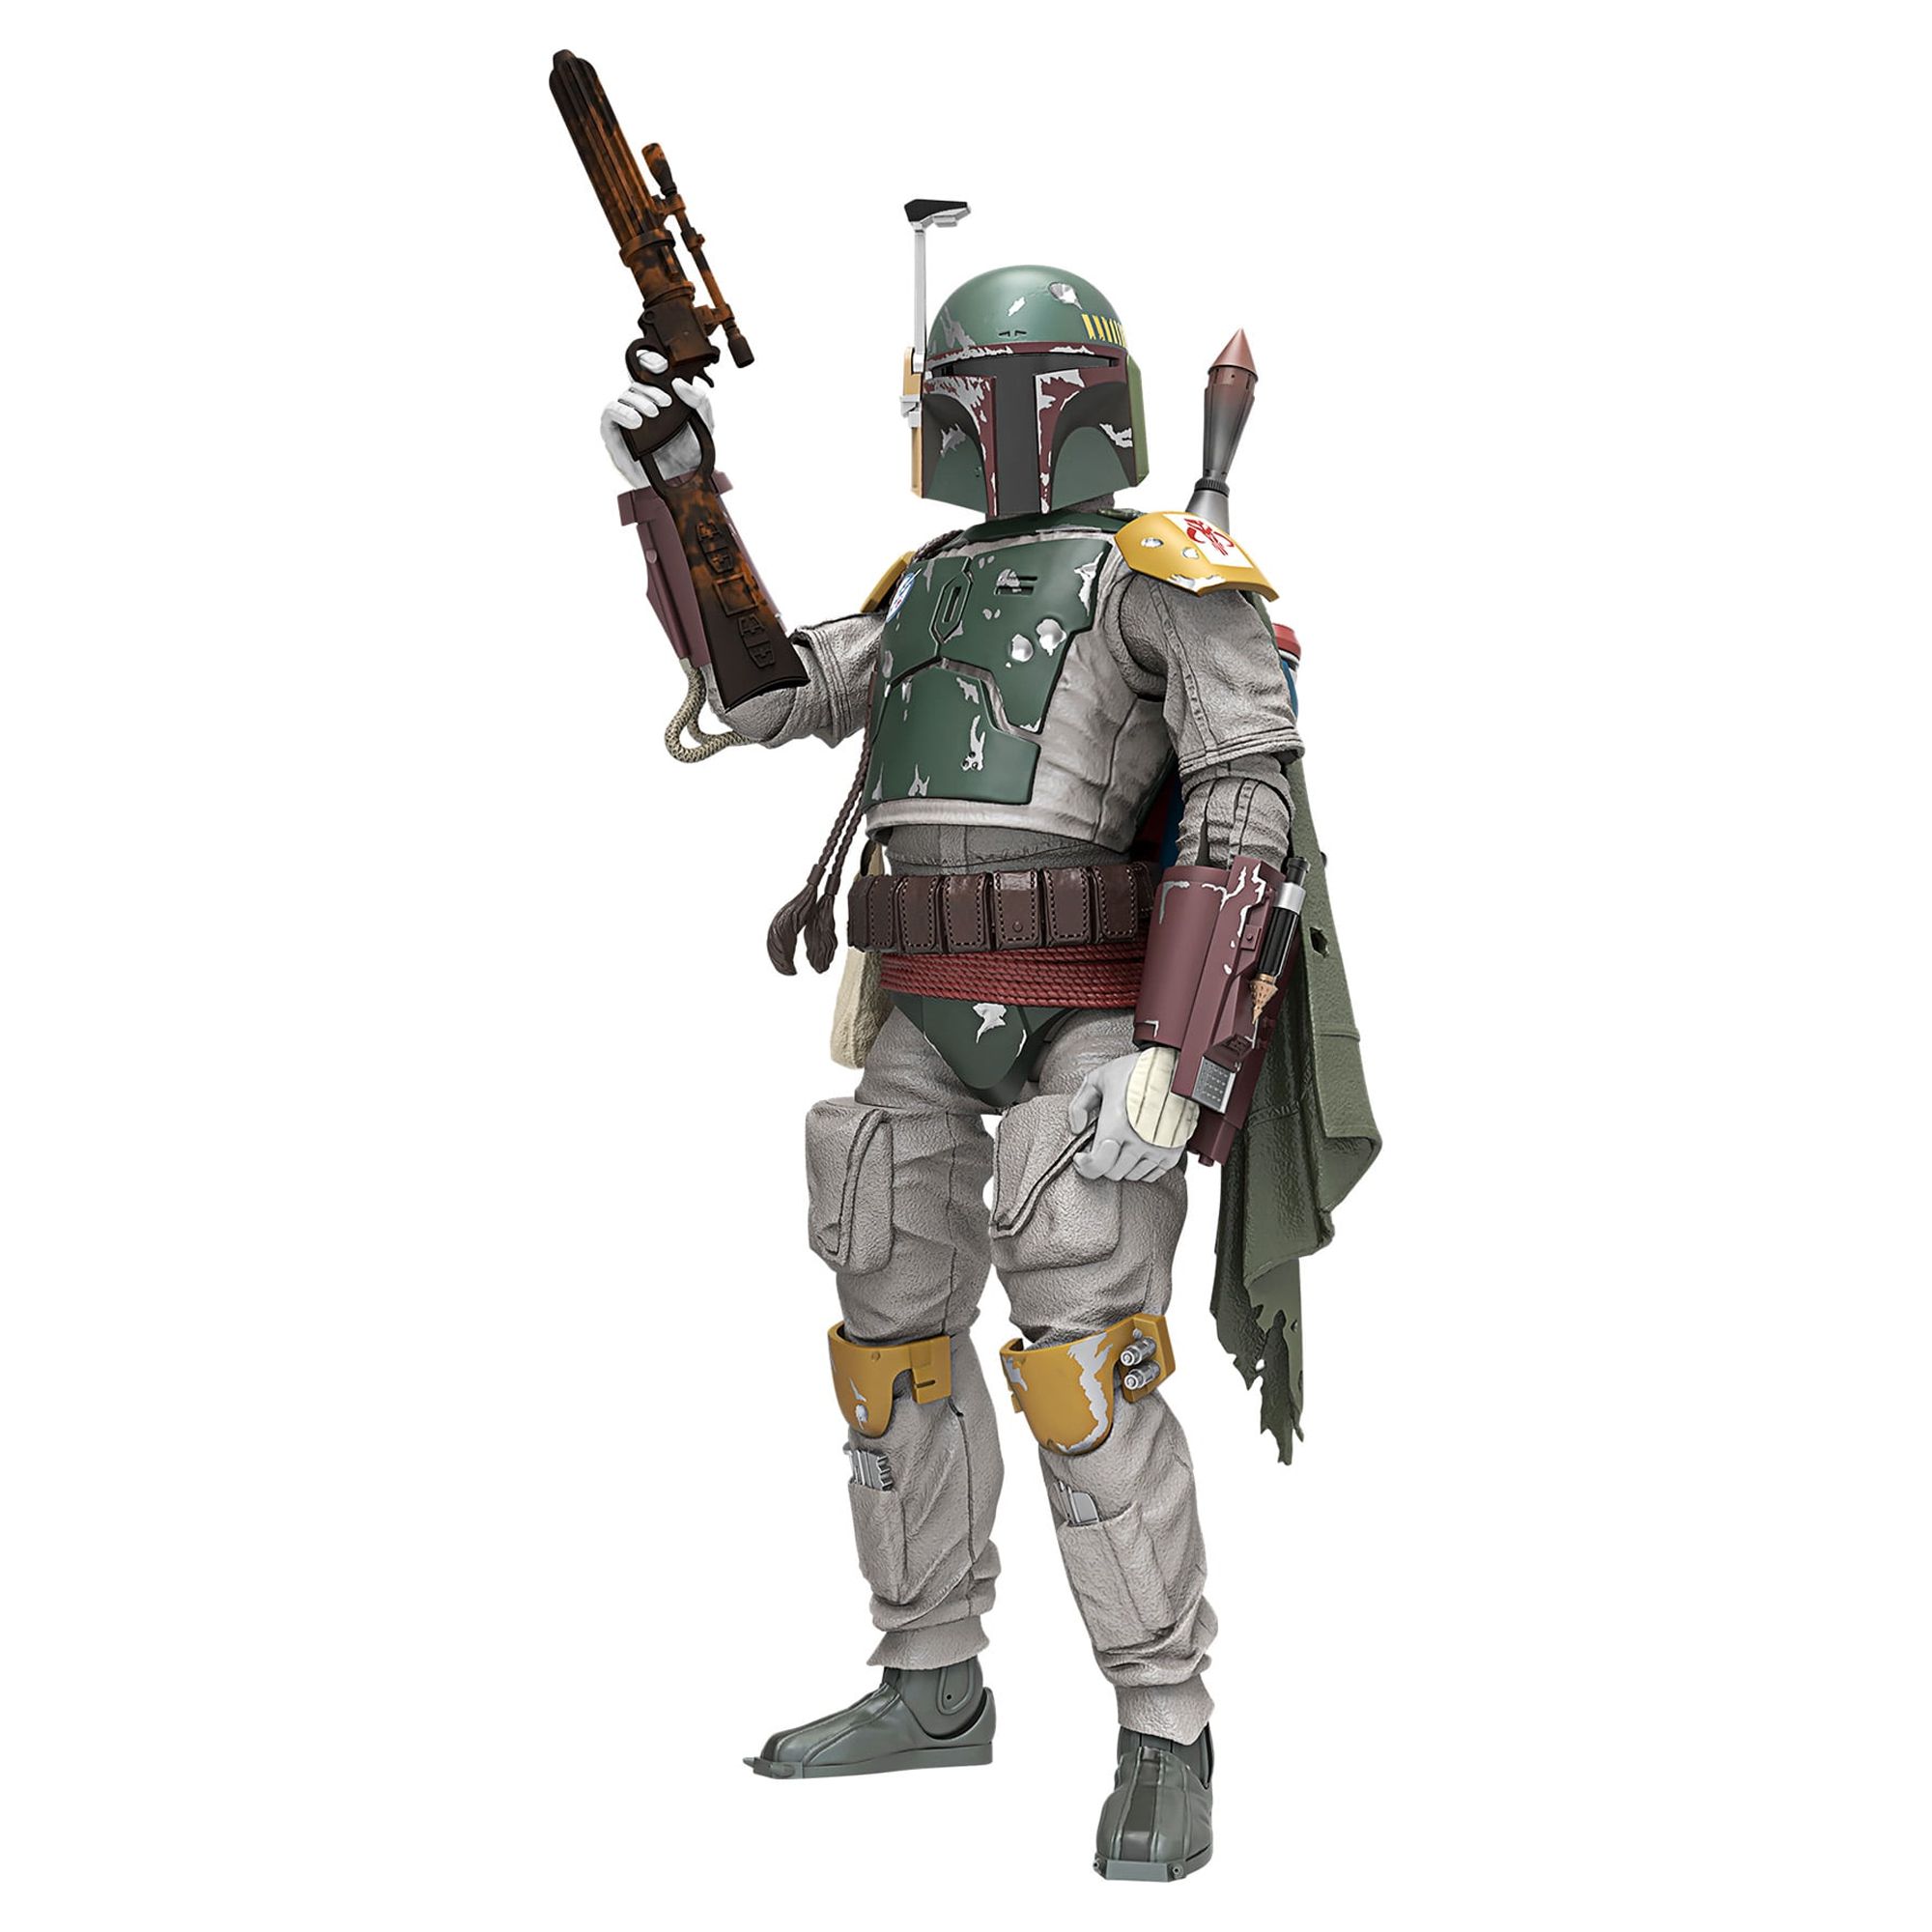 Star Wars Return of the Jedi: The Black Series Boba Fett Kids Toy Action Figure for Boys and Girls (3”) - image 1 of 11